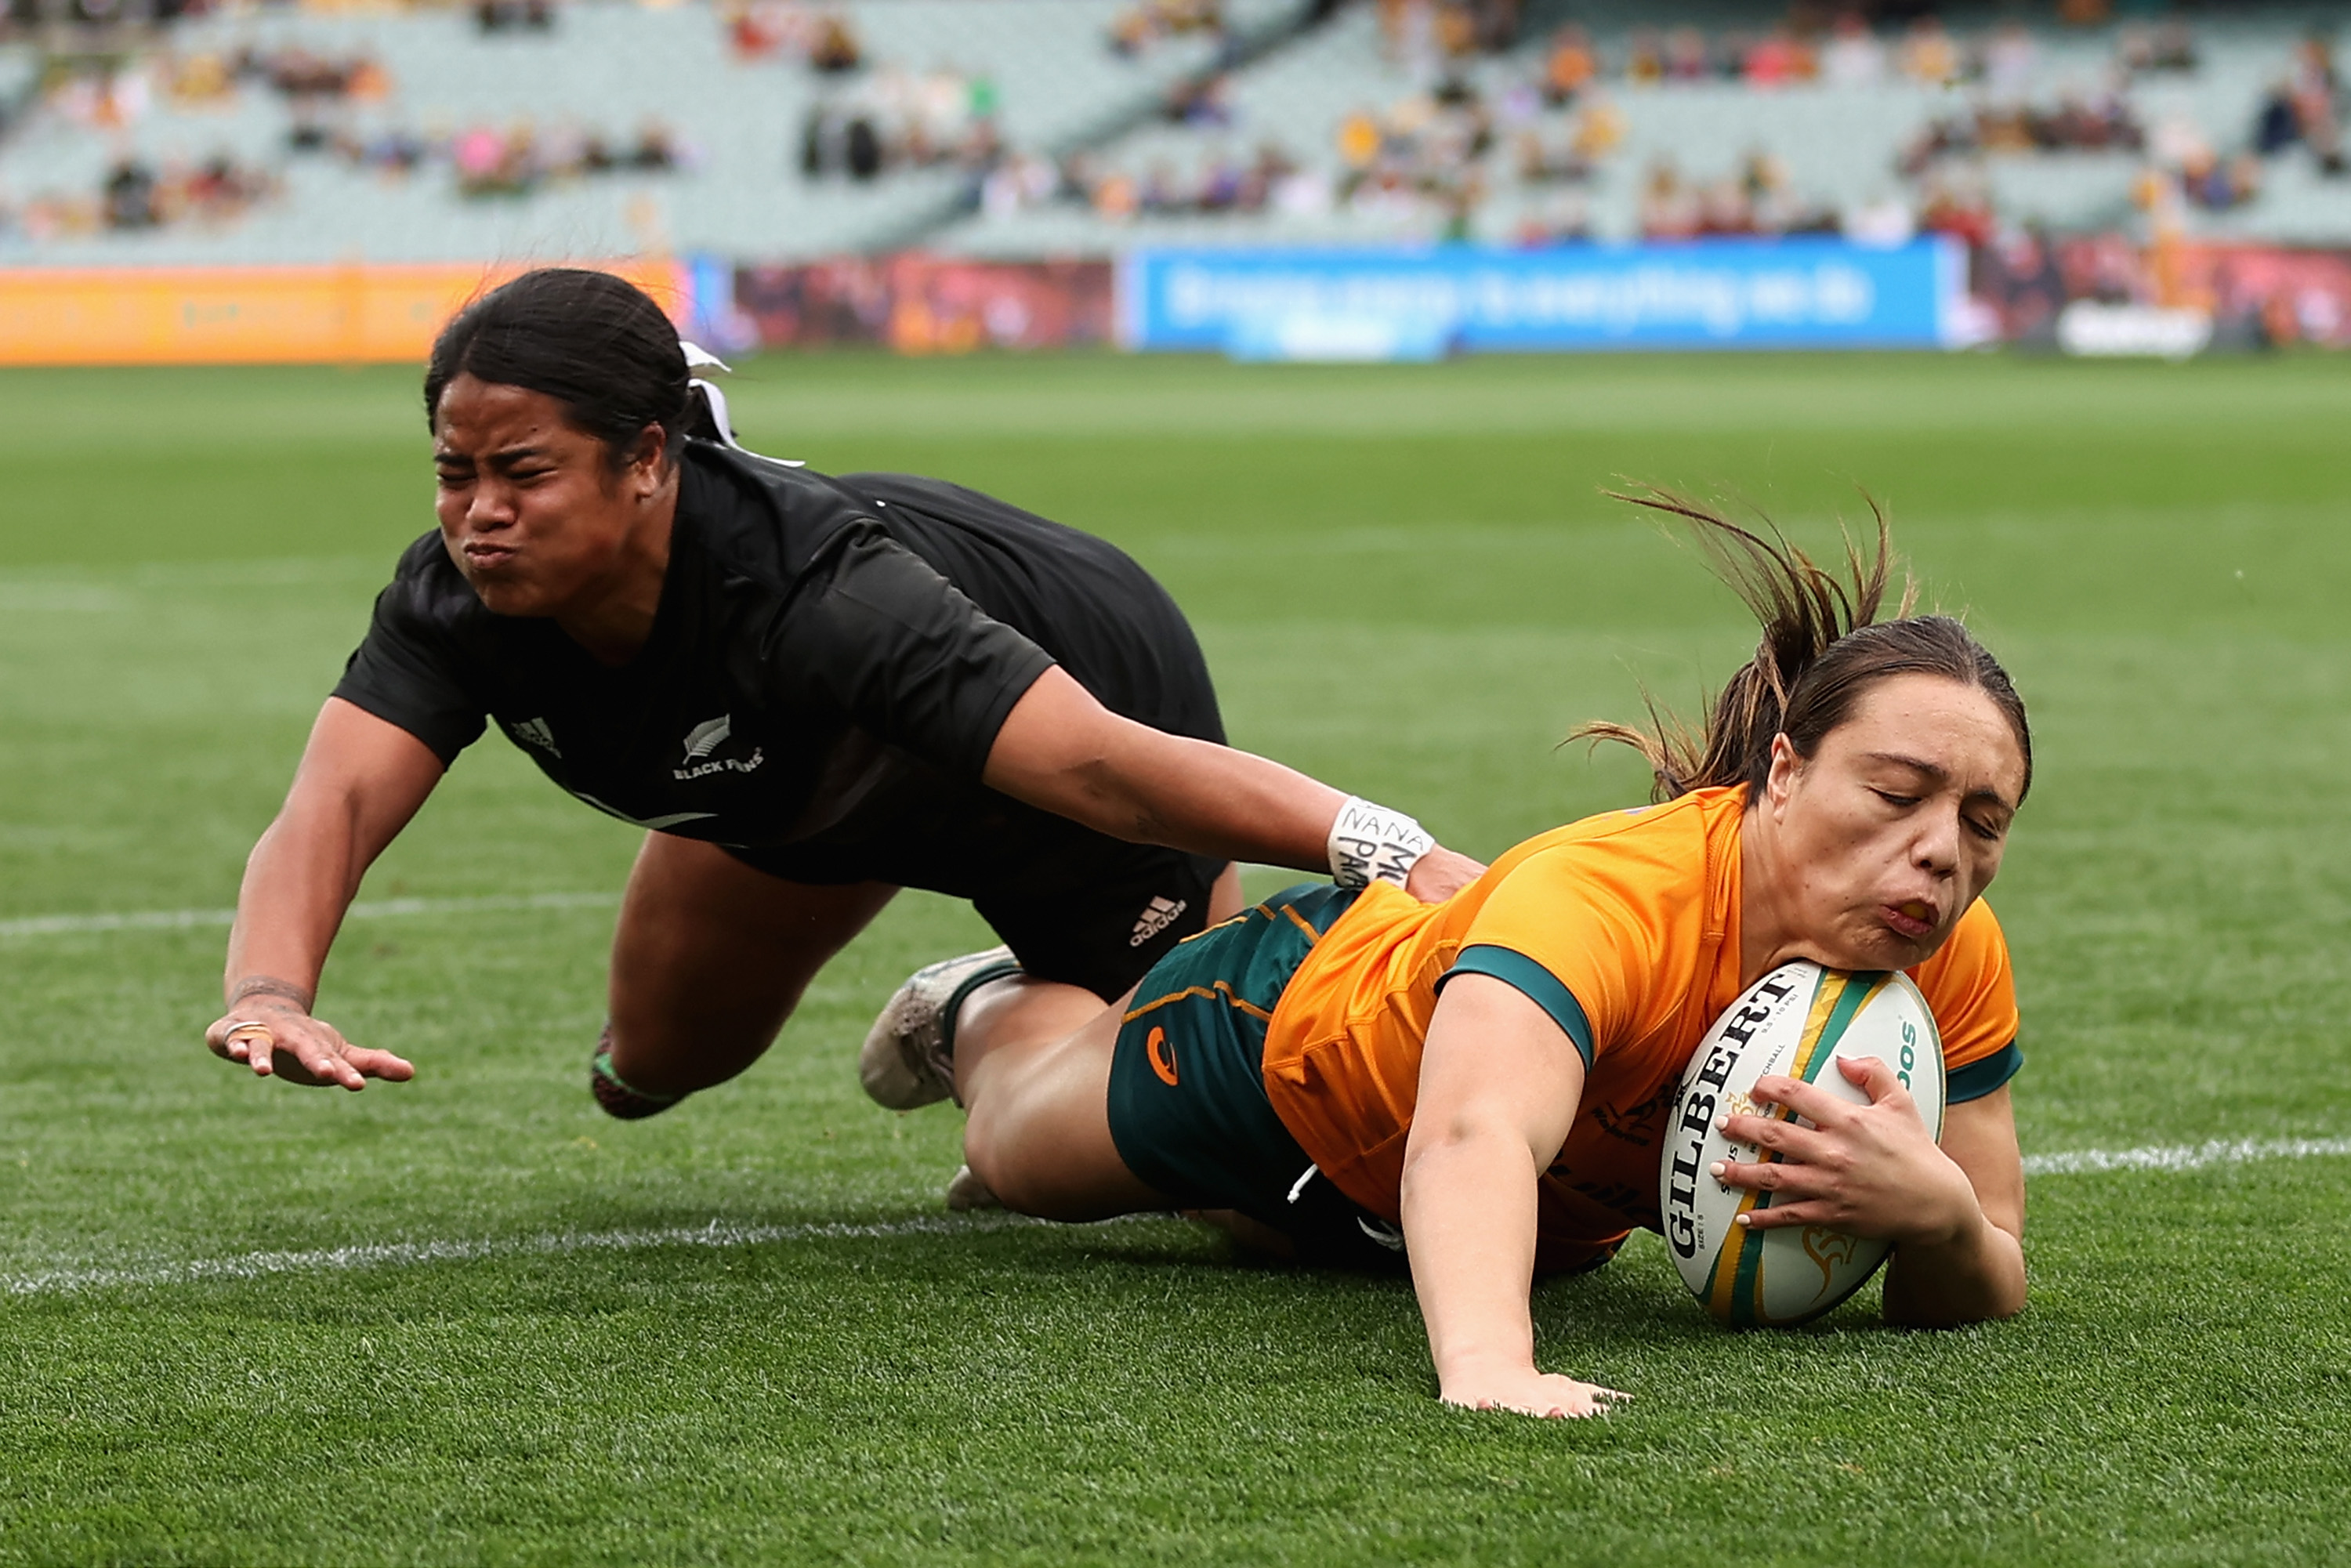 Womens Rugby World Cup 2022 preview, Stan Sport experts give tournament predictions